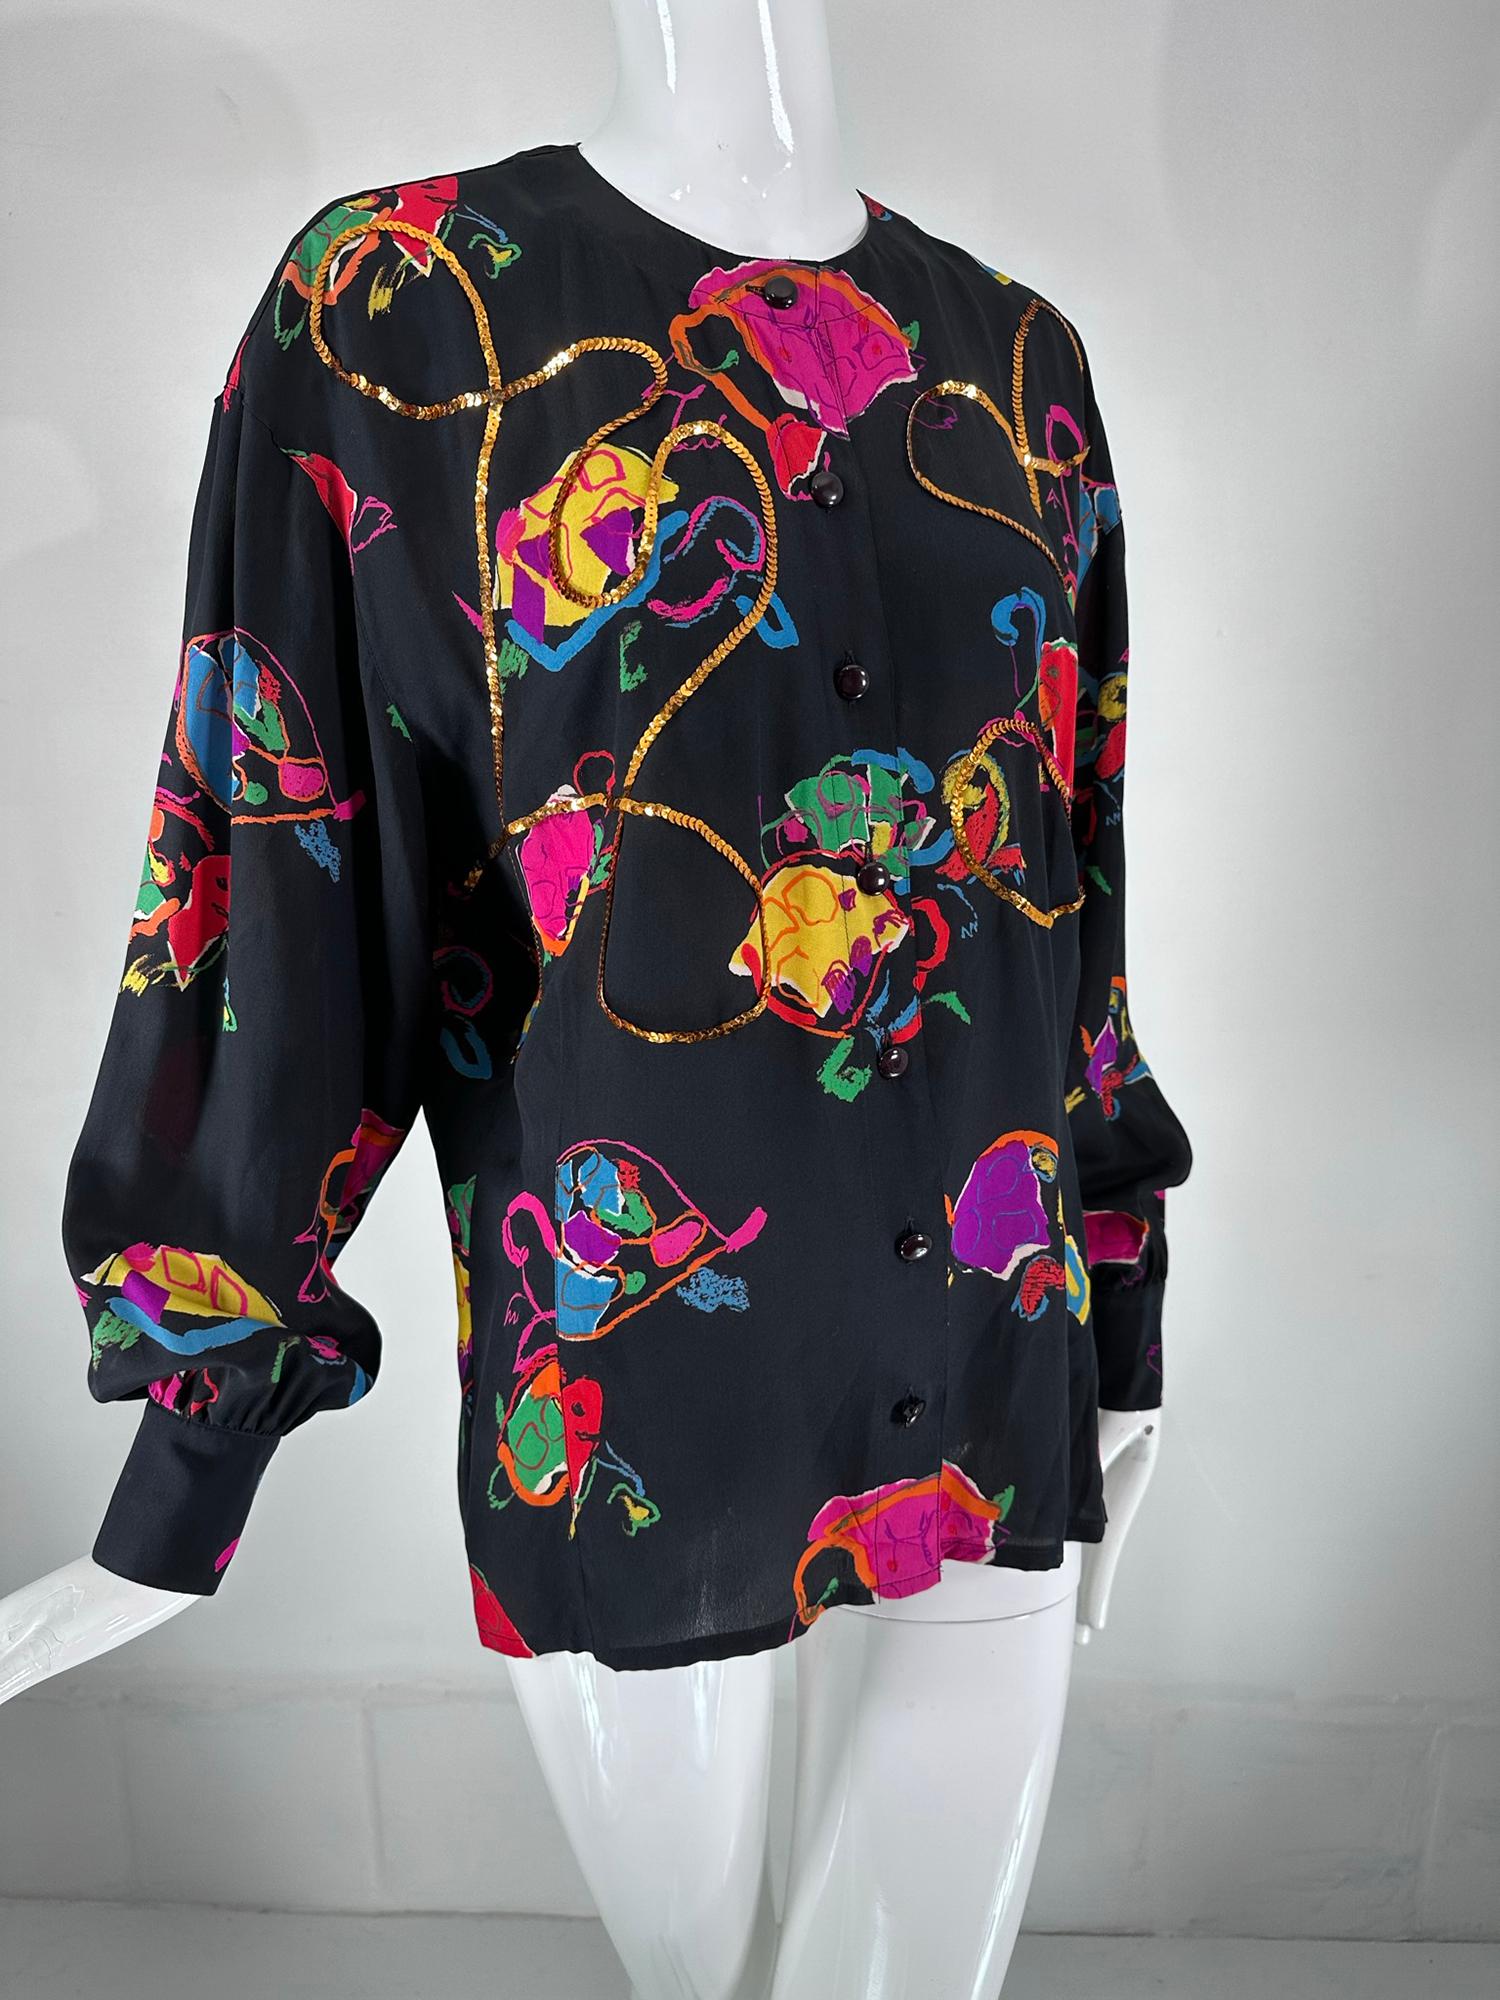 Escada by Margaretha Ley Black Silk Printed Round Neck Blouse with Sequins size 40, from the 1990s. Black silk with a bright abstract print throughout. The blouse is sewn with a winding path of copper sequins front & back. Dropped shoulder line,